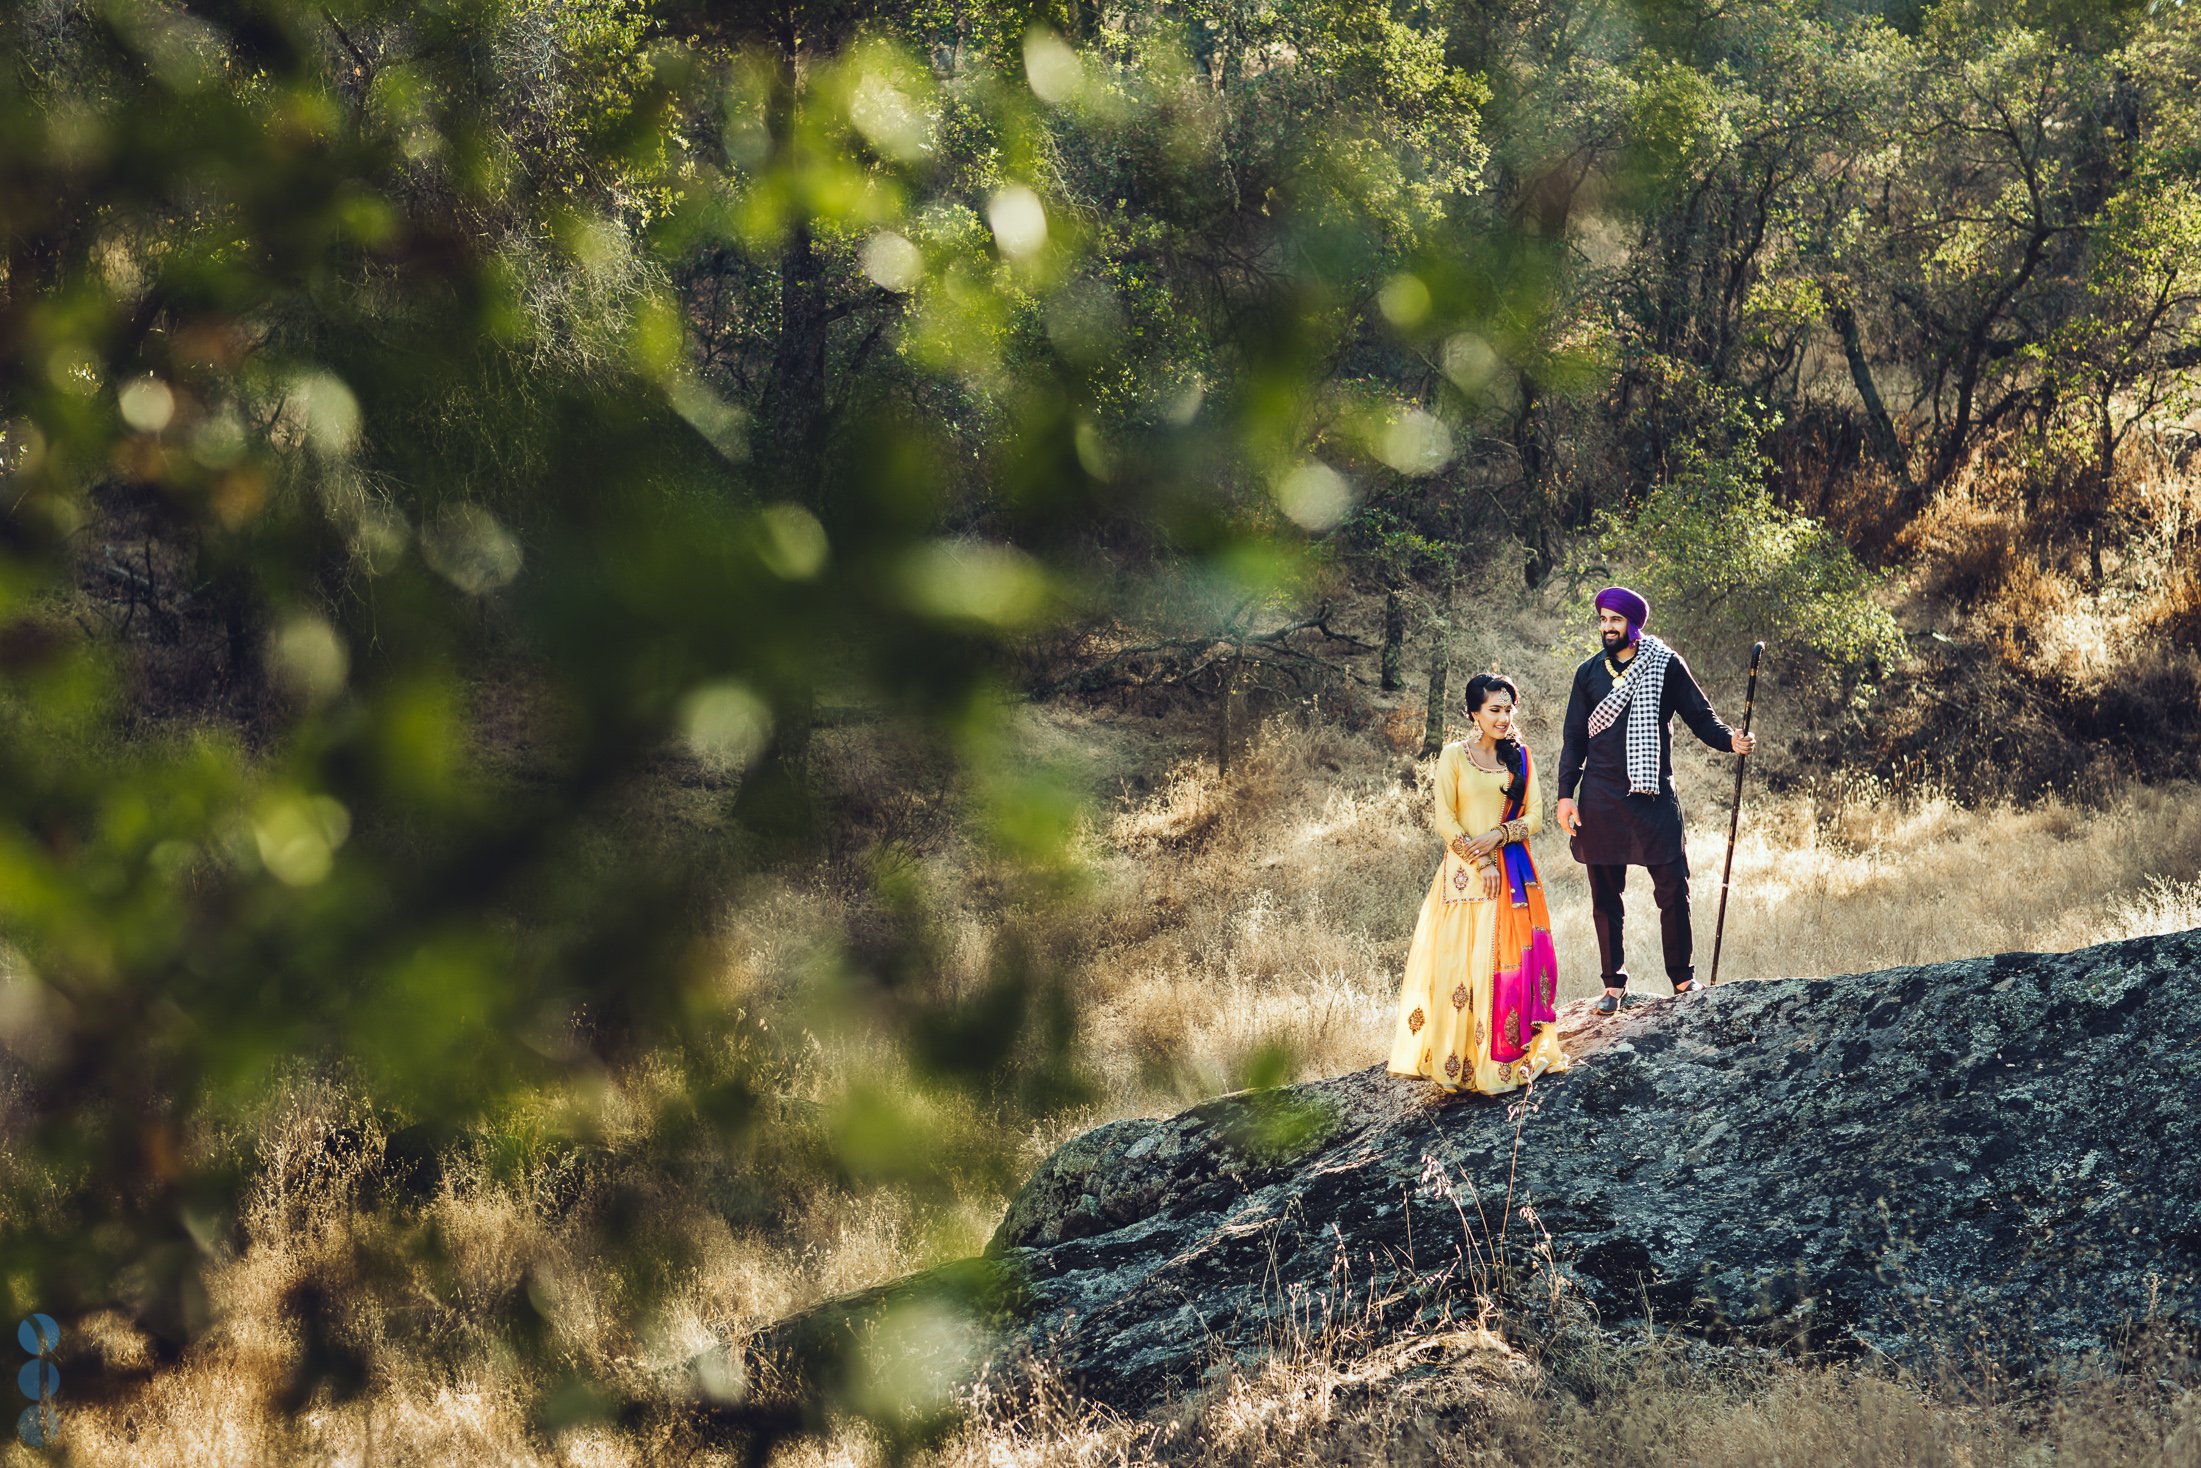 San Francisco Classic Indian Engagement Photography of Pardeep & Lovepreet by Aperina Studios.